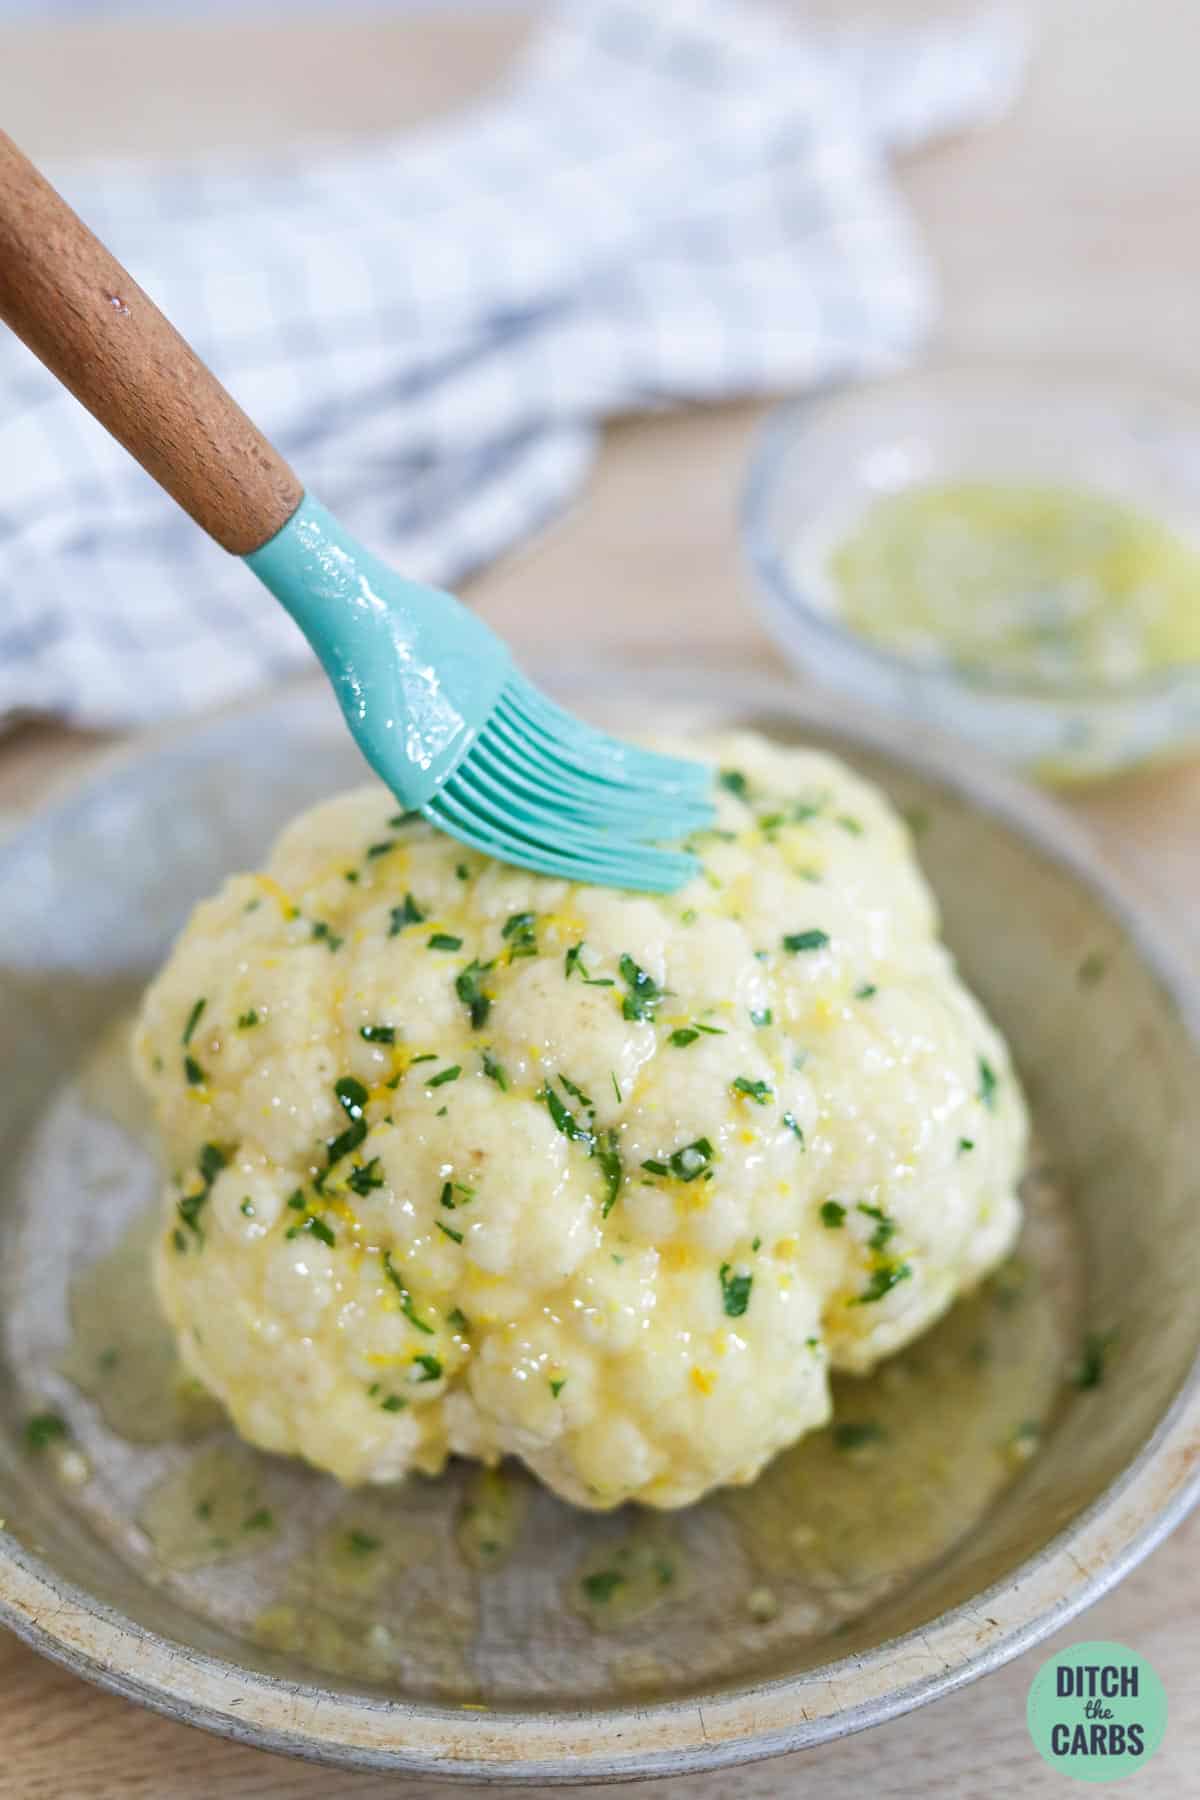 a blue pastry brush brushing melted herbed butter onto a whole cauliflower